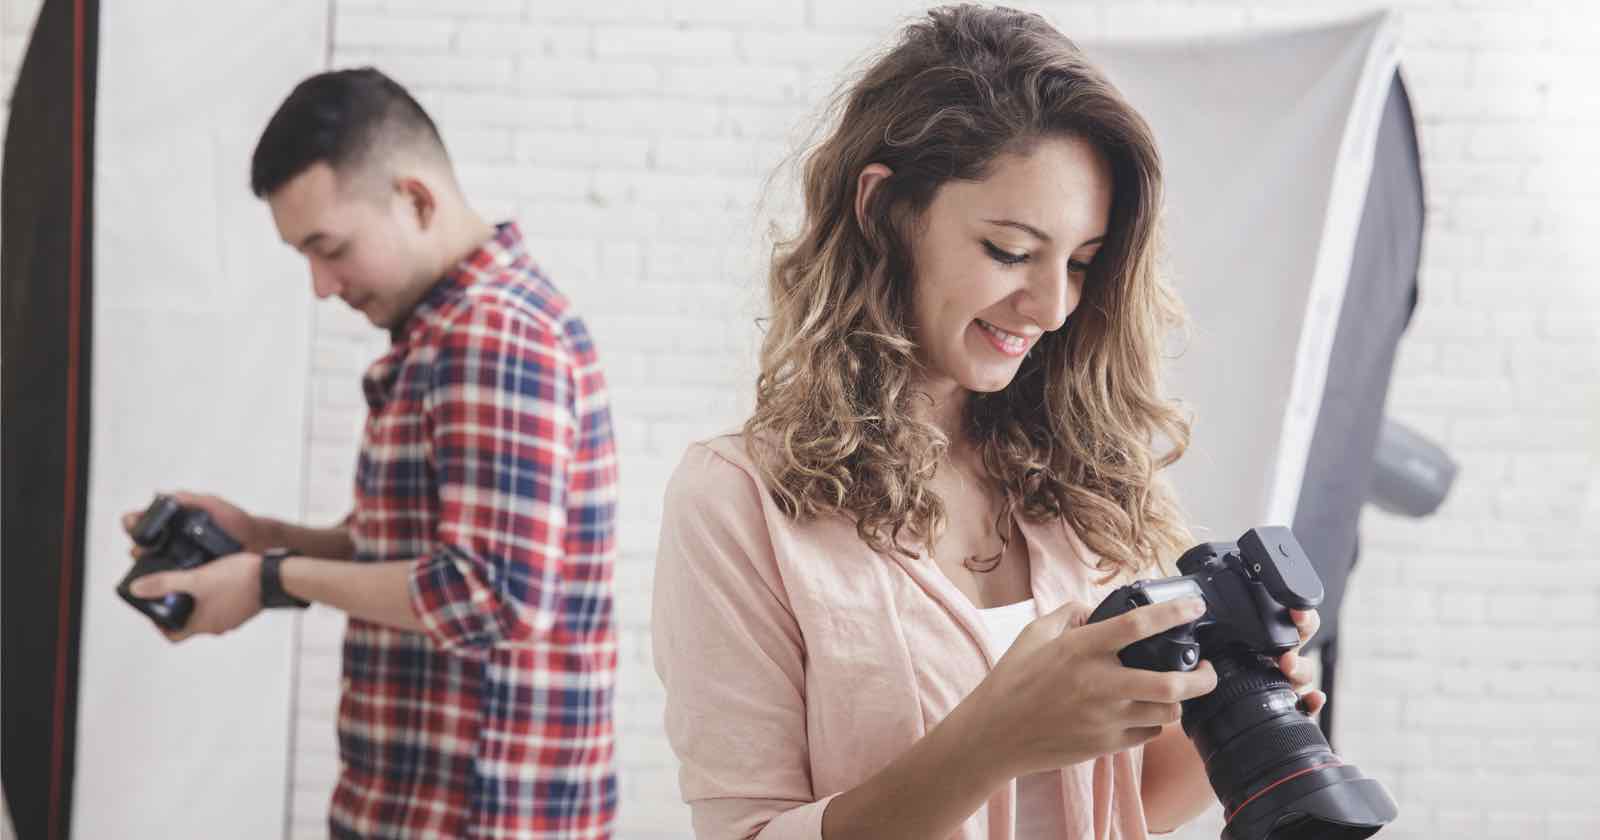 Male Freelance Photographers Earn 26% More Than Female Peers in US